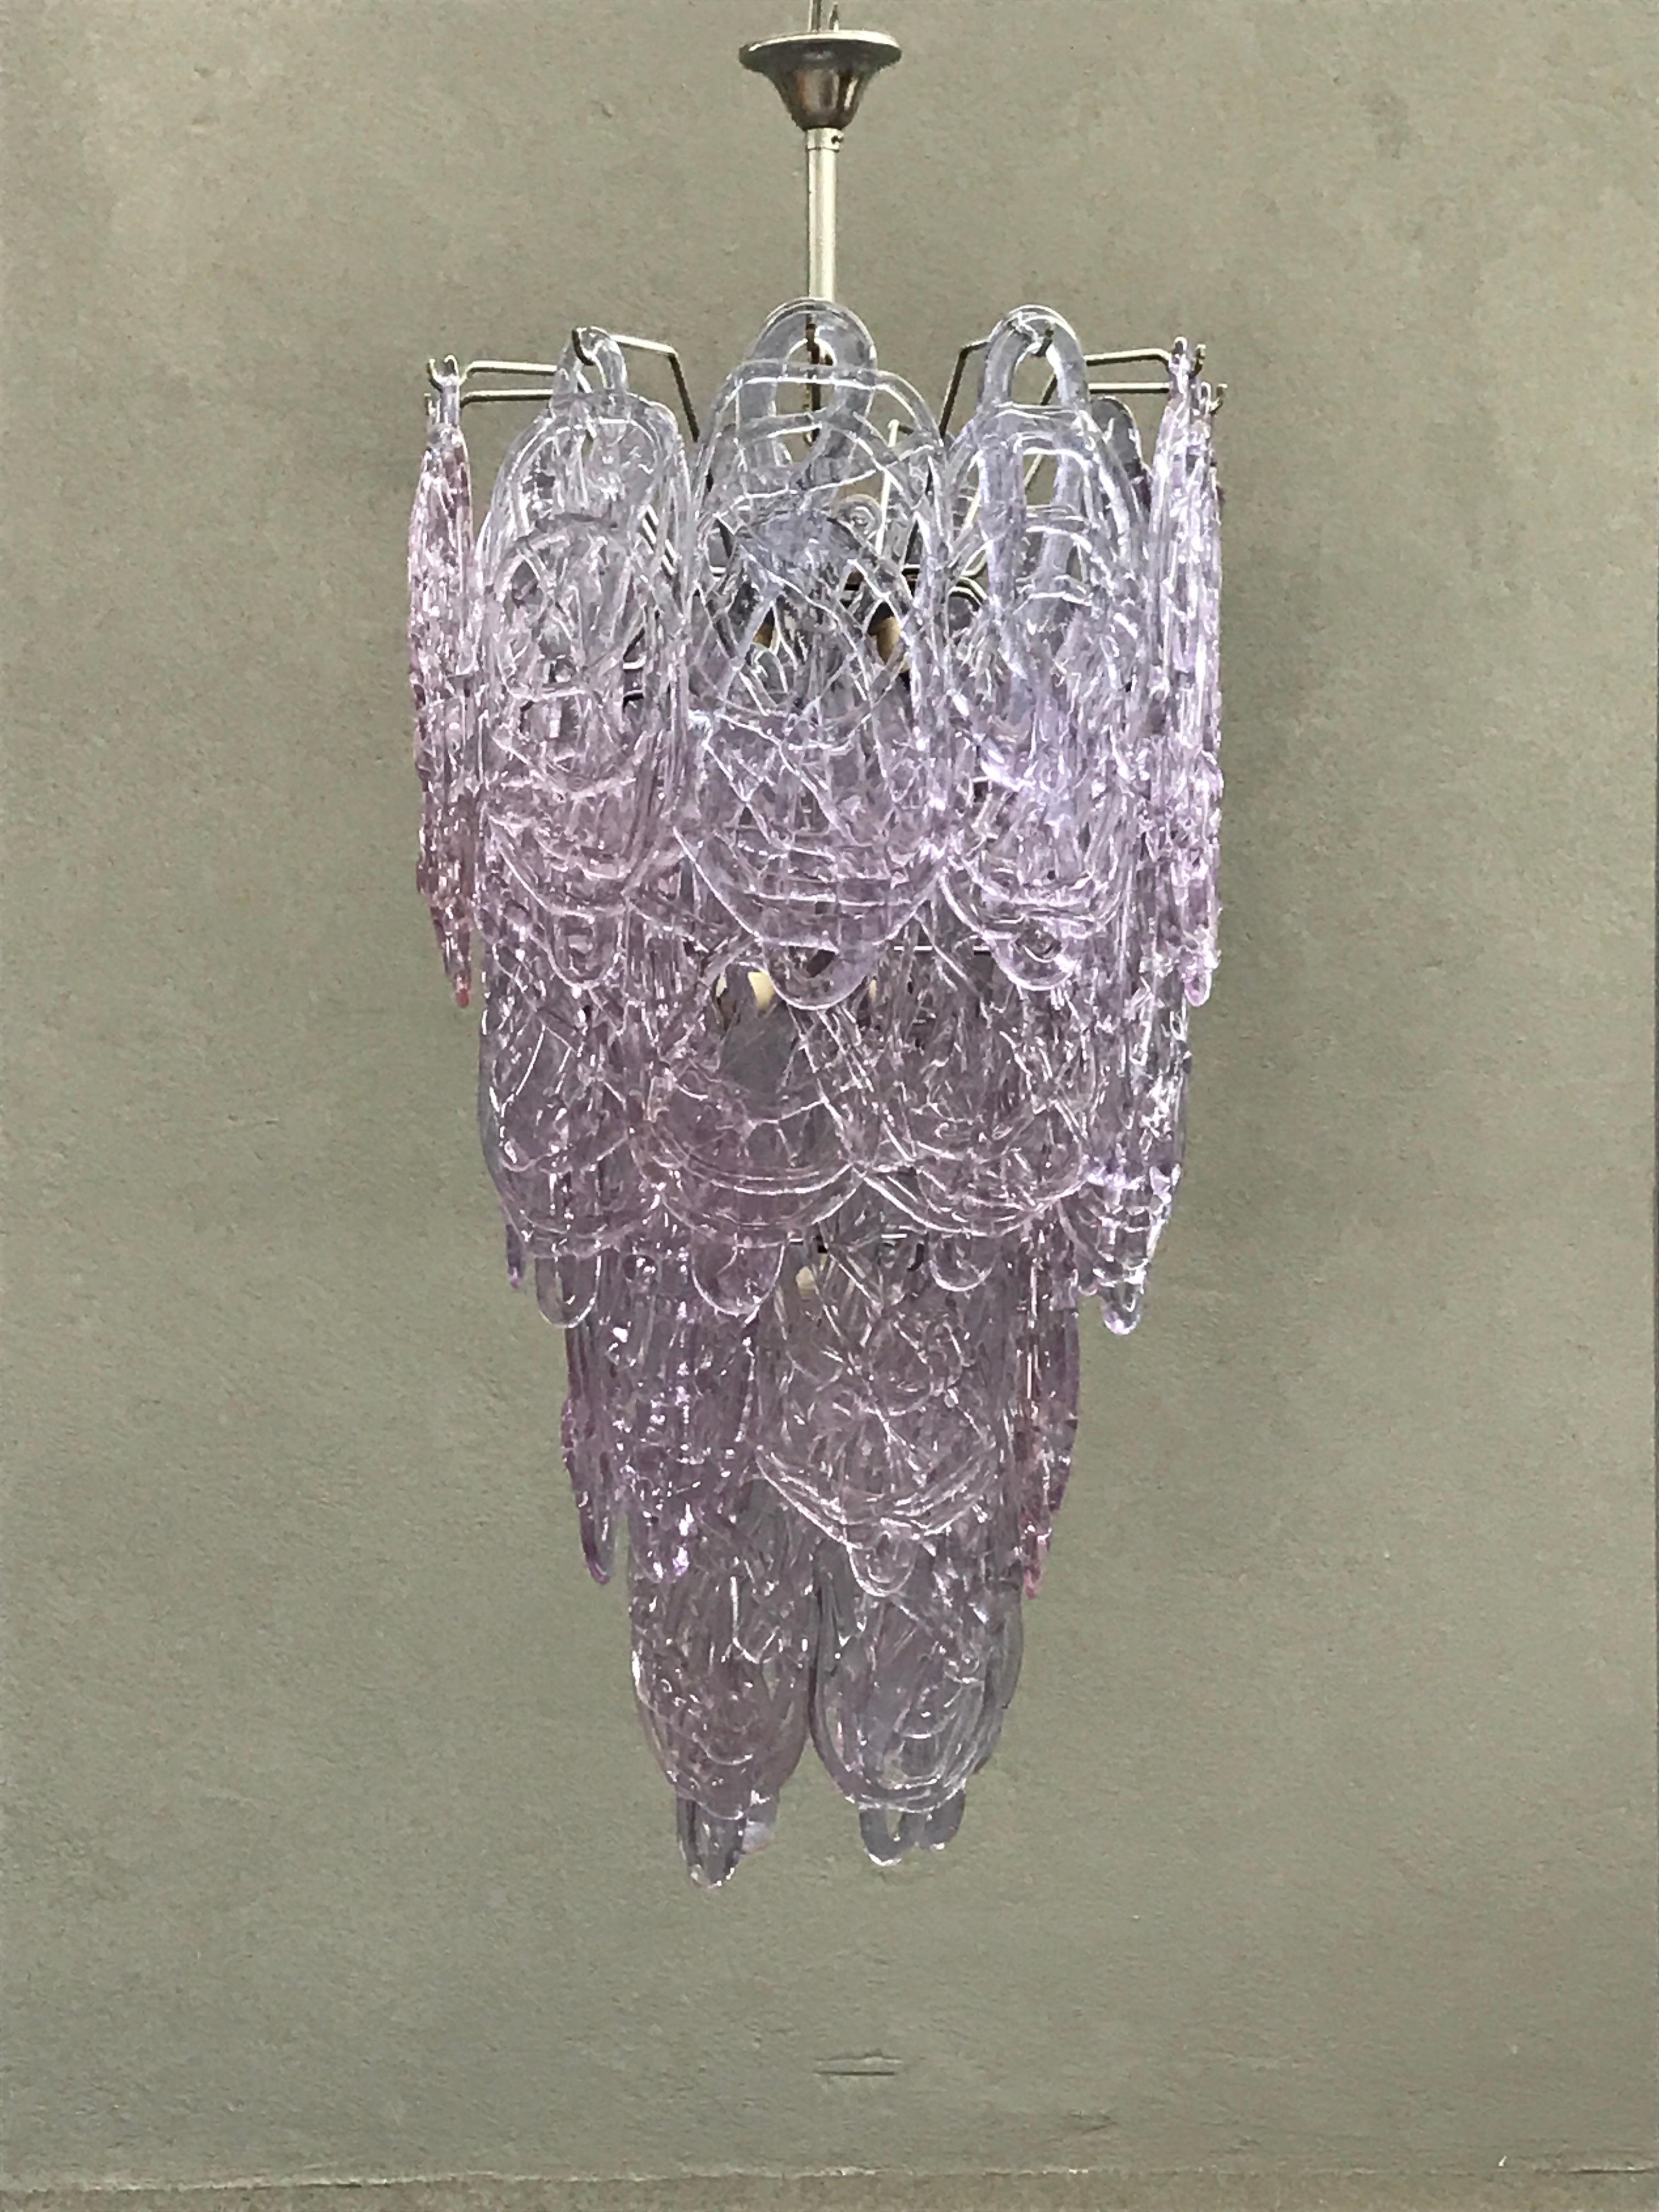 Stunning Murano glass chandelier by Mazzega. Metal frame and 31 glasses.
Each glass is individually handblown. Four tiers and seven lights.